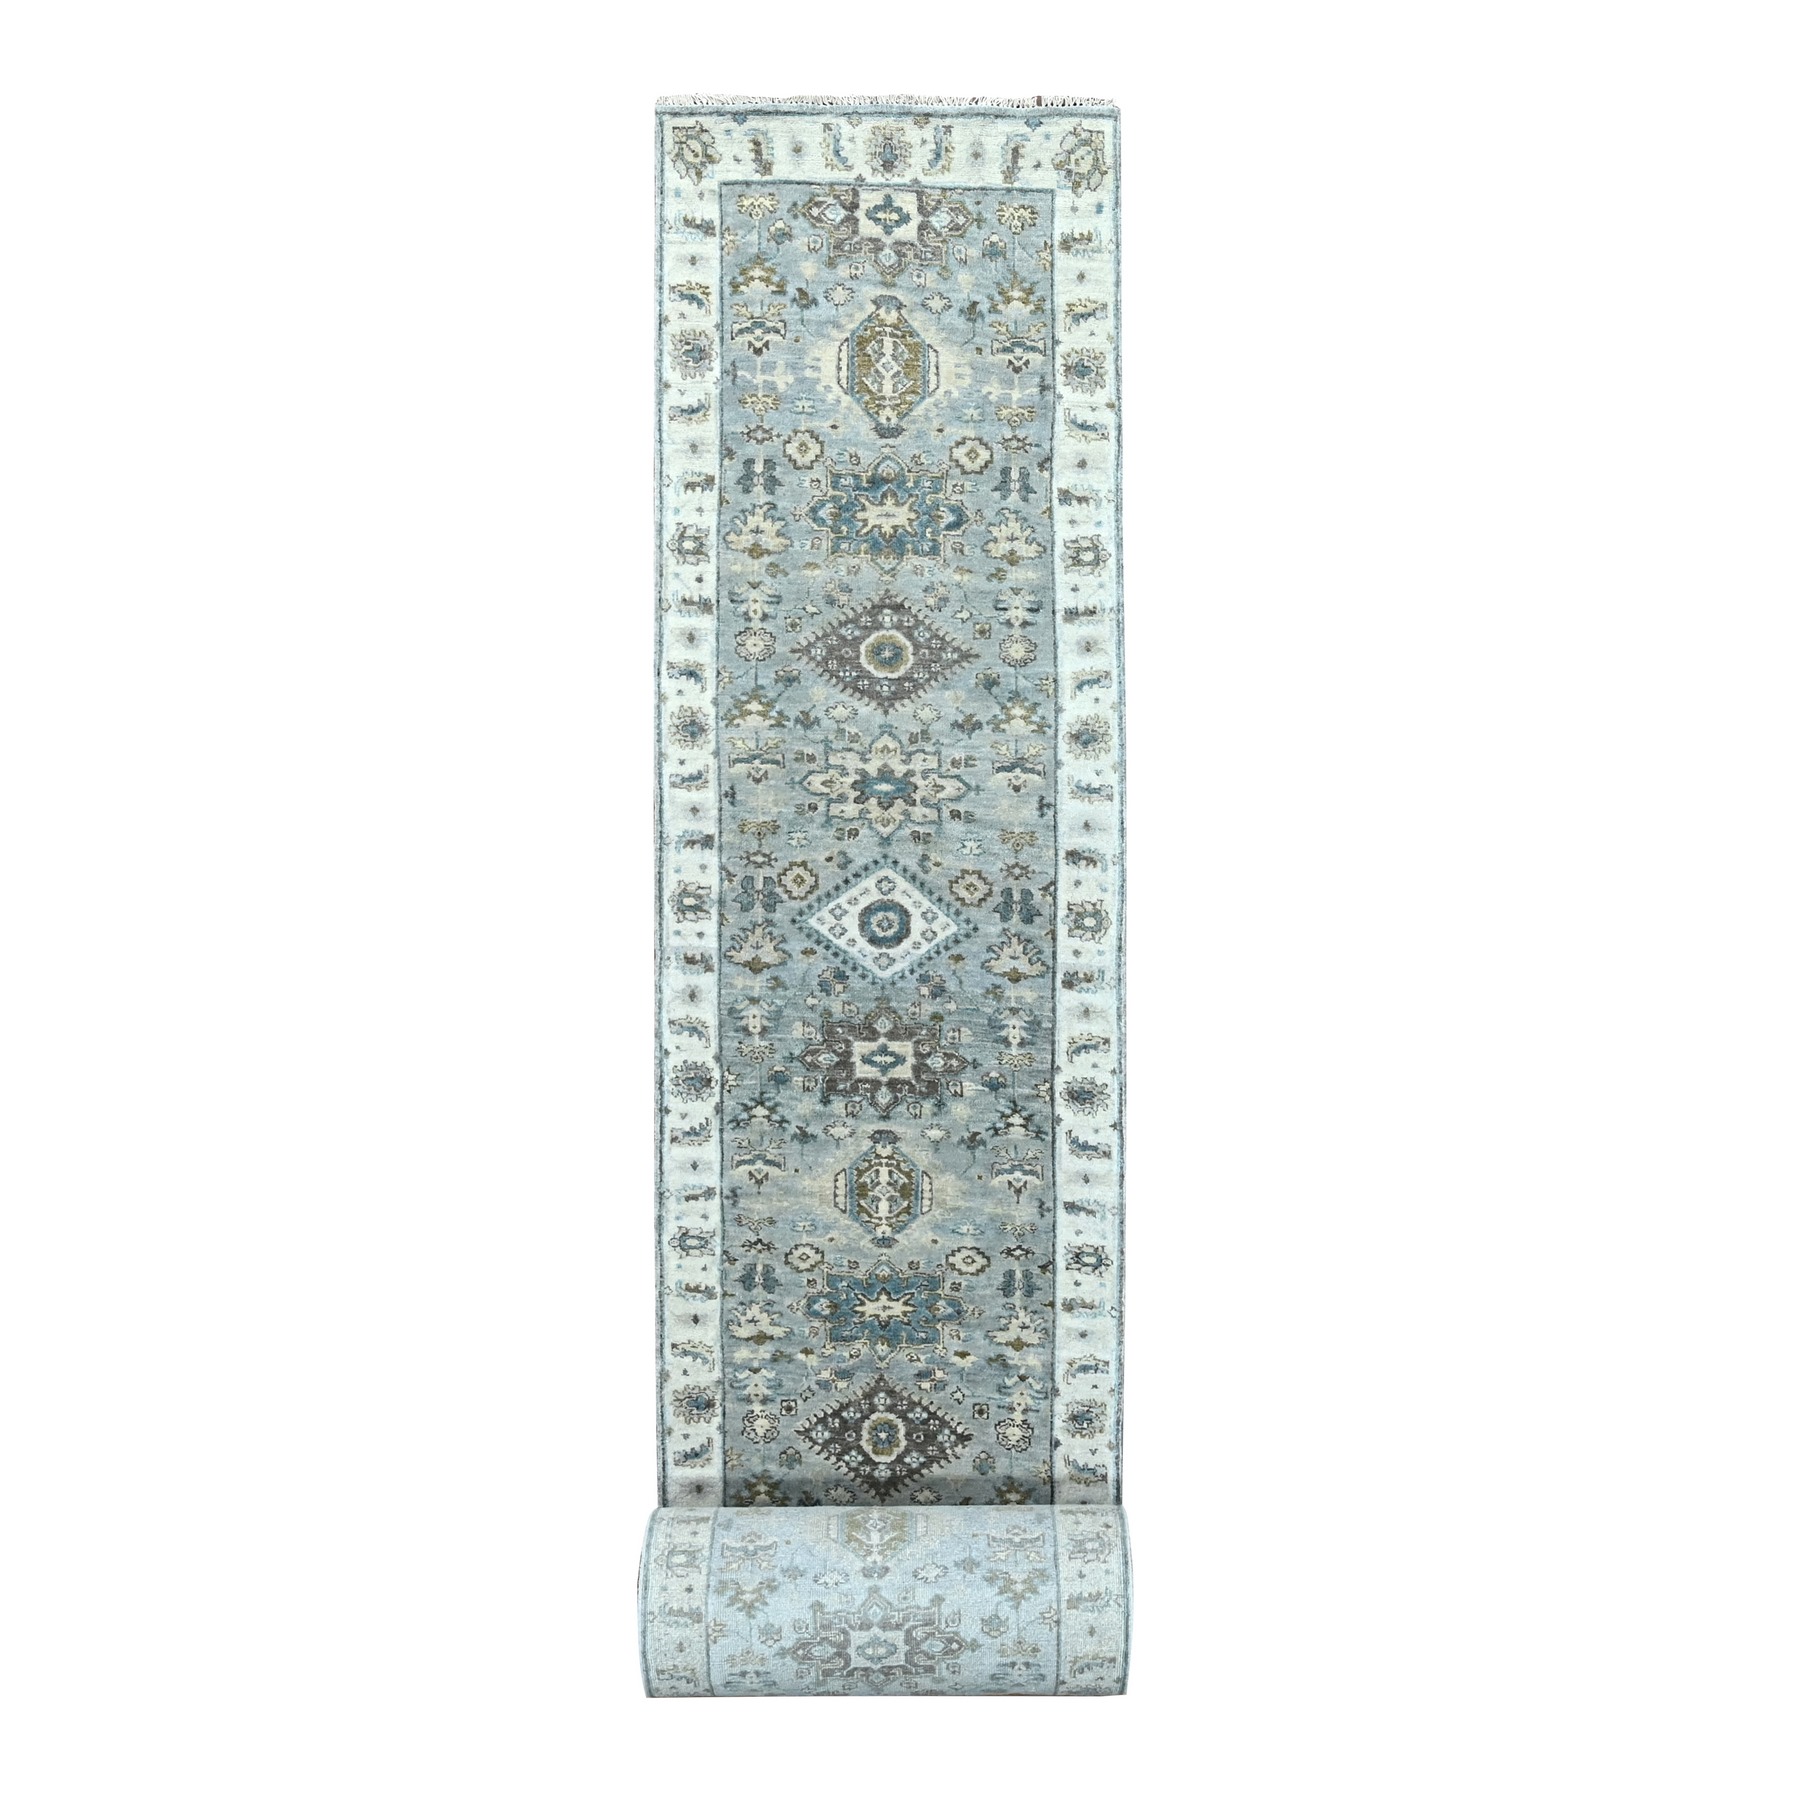 Seraph Gray With White Smoke, Karajeh Design with Geometric Motifs, Soft to the Touch Pile, Hand Knotted, Pure Wool, Vegetable Dyes, XL Runner Oriental Rug 